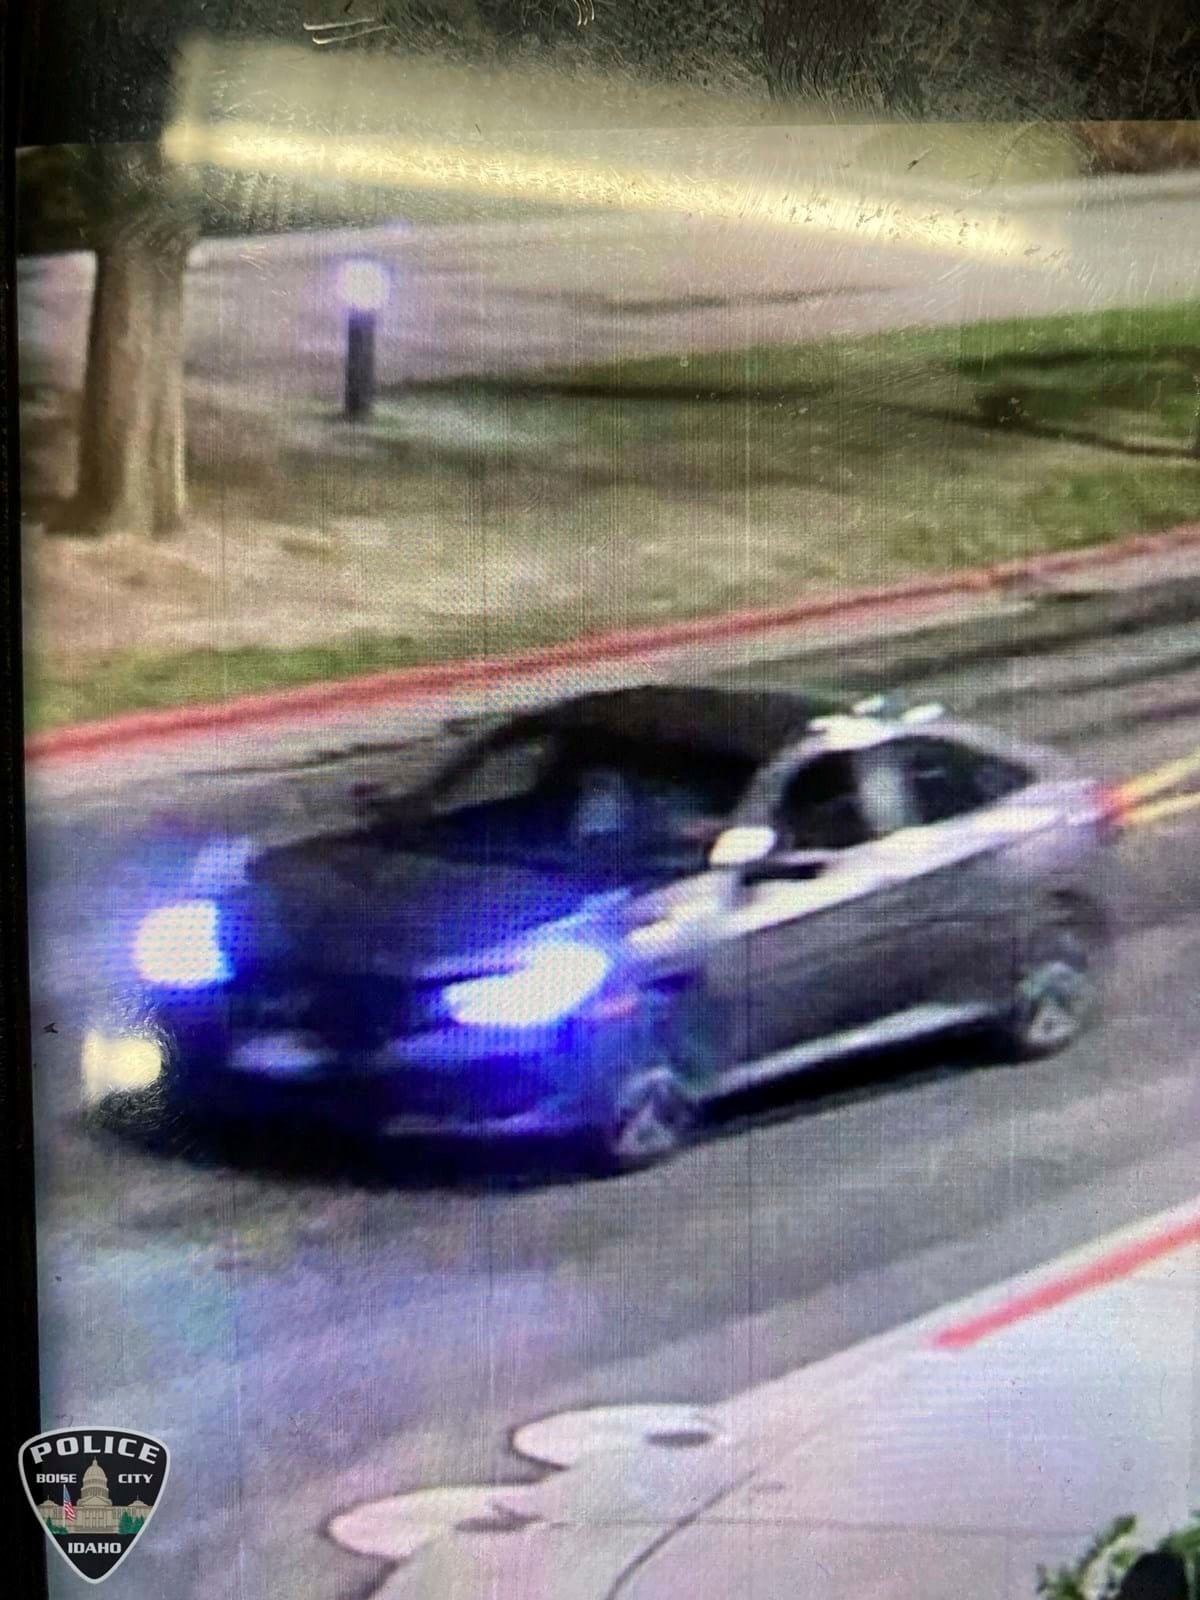 The men escaped in a vehicle identified as a grey Honda Accord